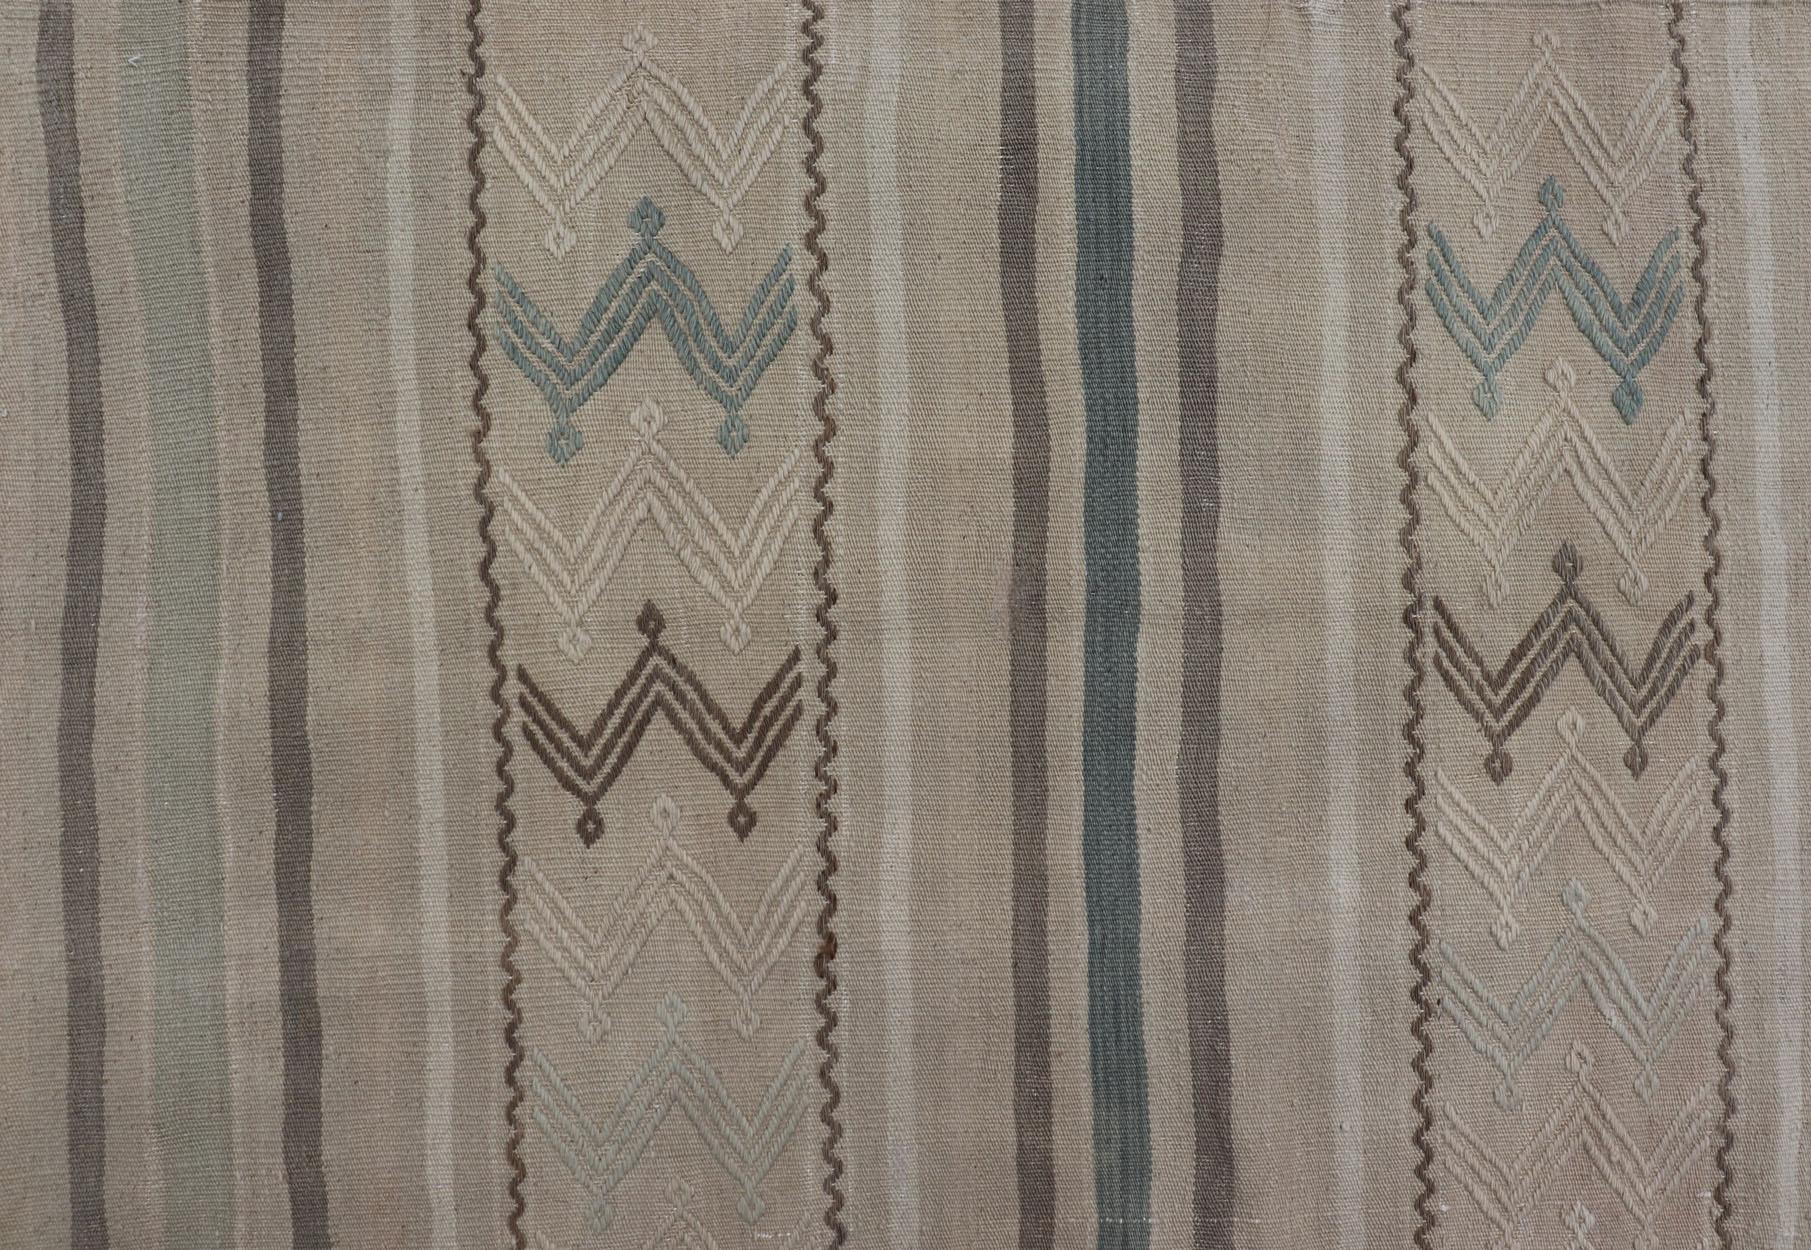 Vintage Turkish Flat-Weave Muted Colored Kilim in Taupe, Brown and Light Blue In Good Condition For Sale In Atlanta, GA